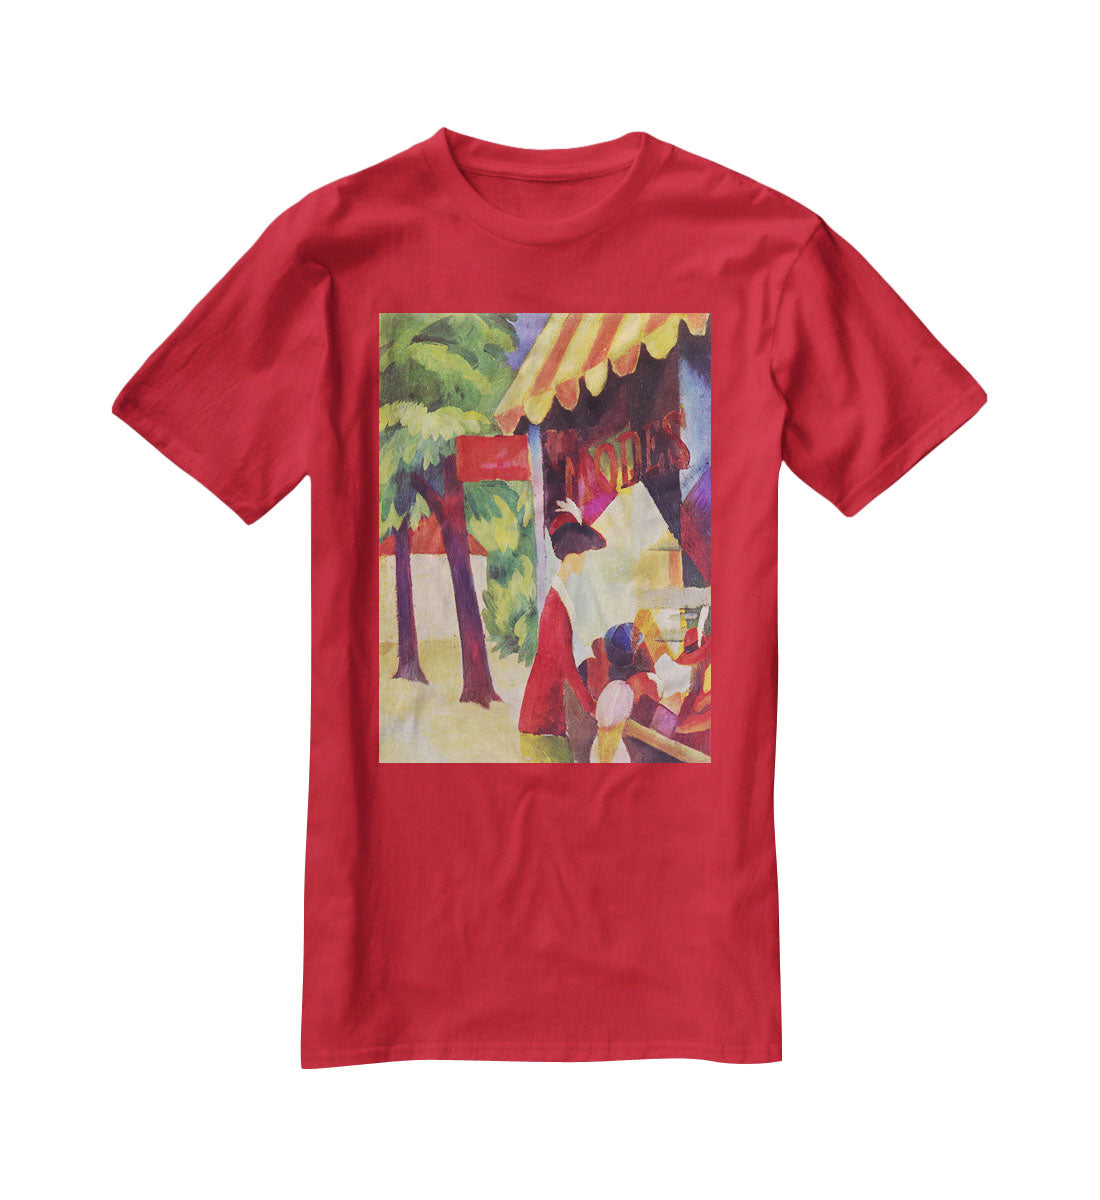 Before Hutladen woman with a red jacket and child by Macke T-Shirt - Canvas Art Rocks - 4